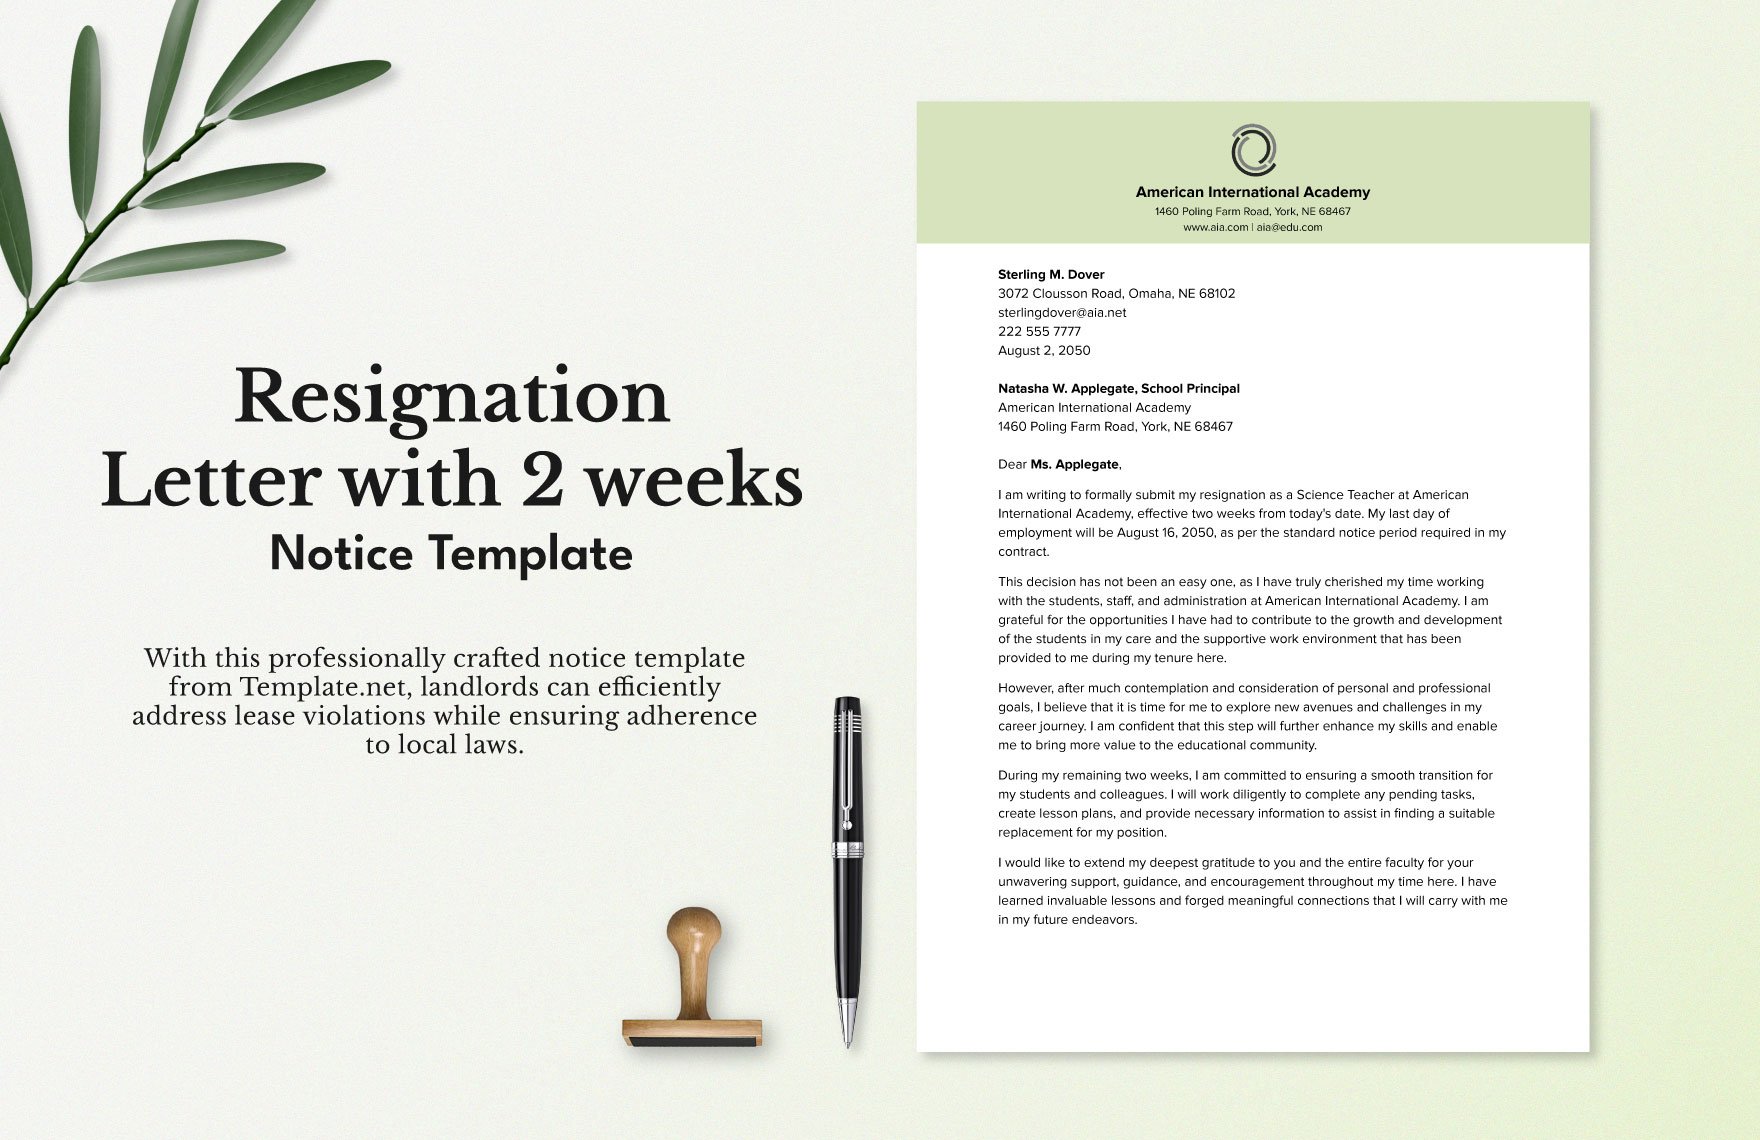 Resignation Letter with 2 Weeks Notice Period Template